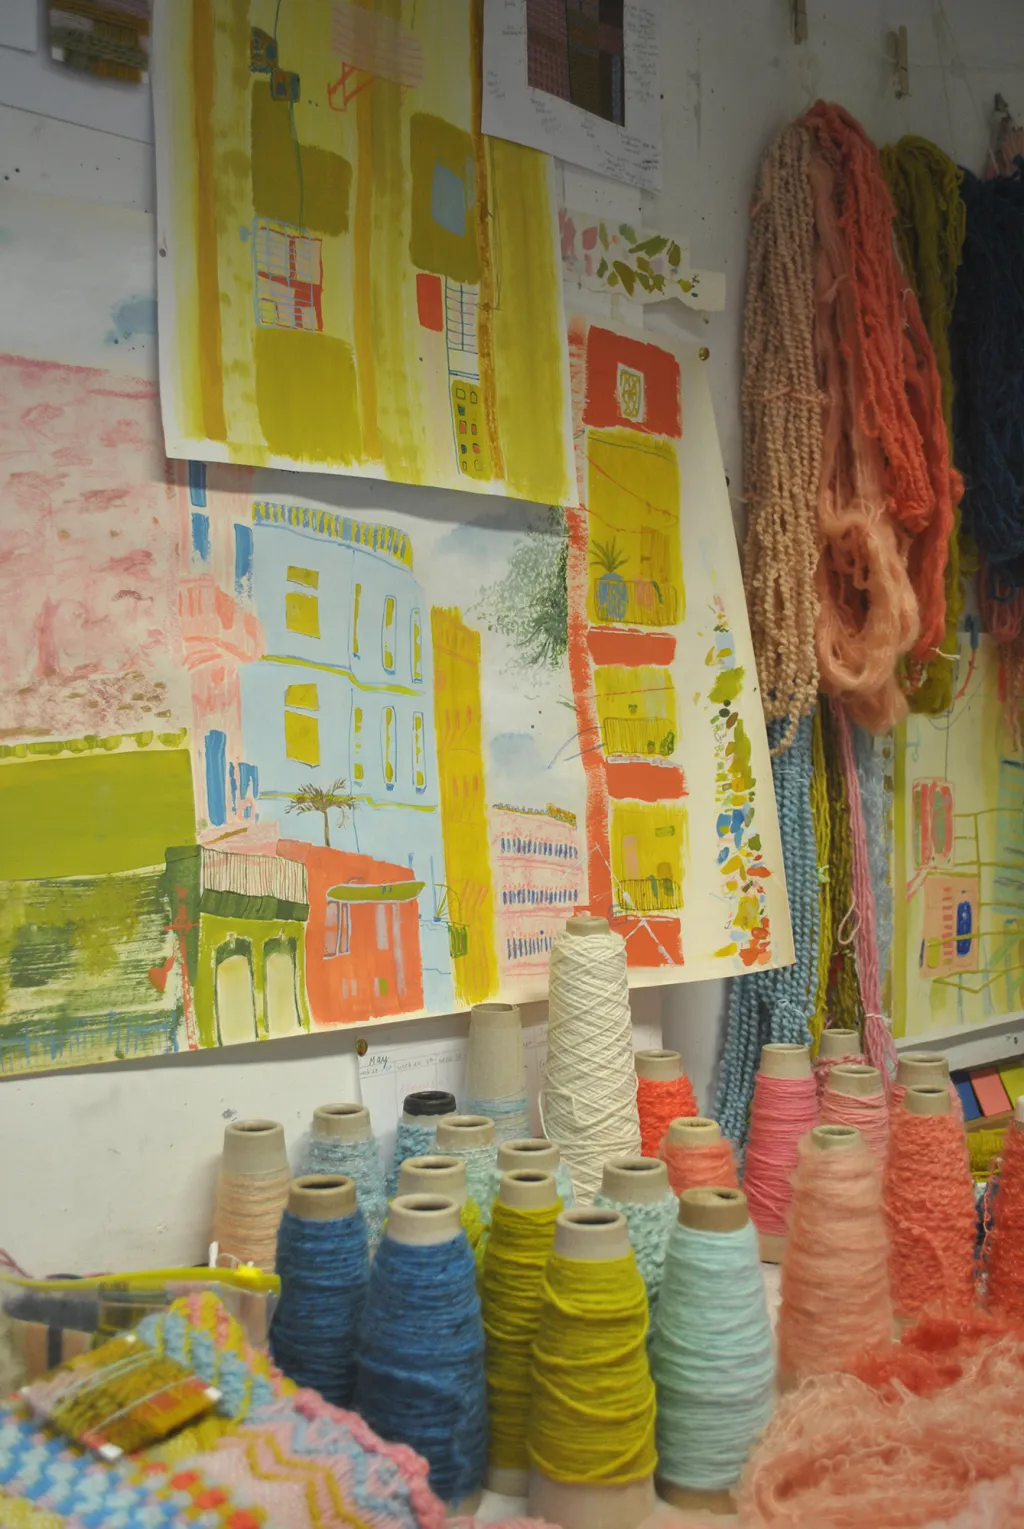 Studio space showing paintings inspired by Cuban architecture, hand dyed yarn spools and hanks